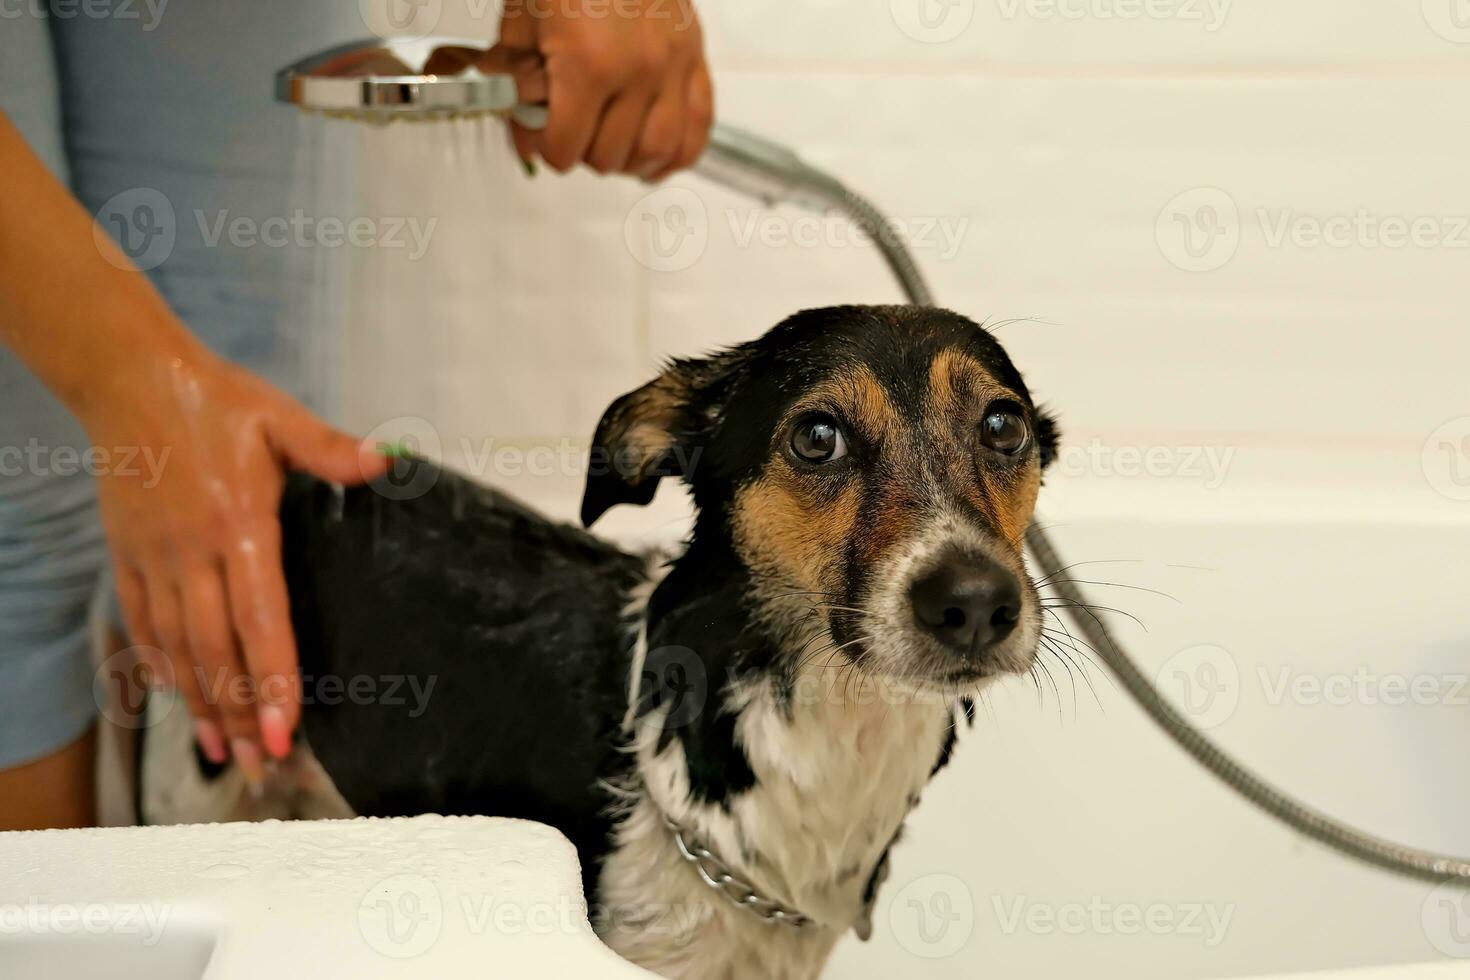 the girl washes the dog. Hygiene of pets. bathing the dog with shampoo. water dripping on the dog photo